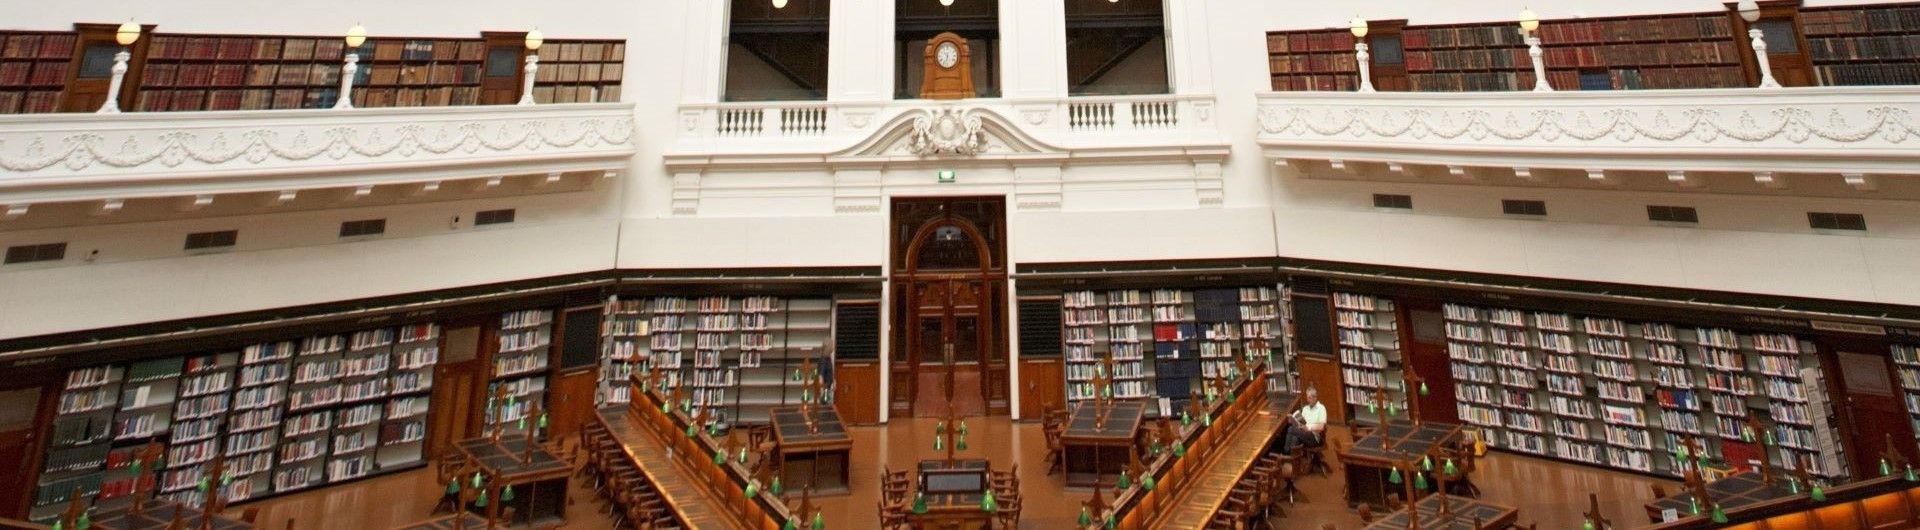 The grand interior of the State Library Victoria.